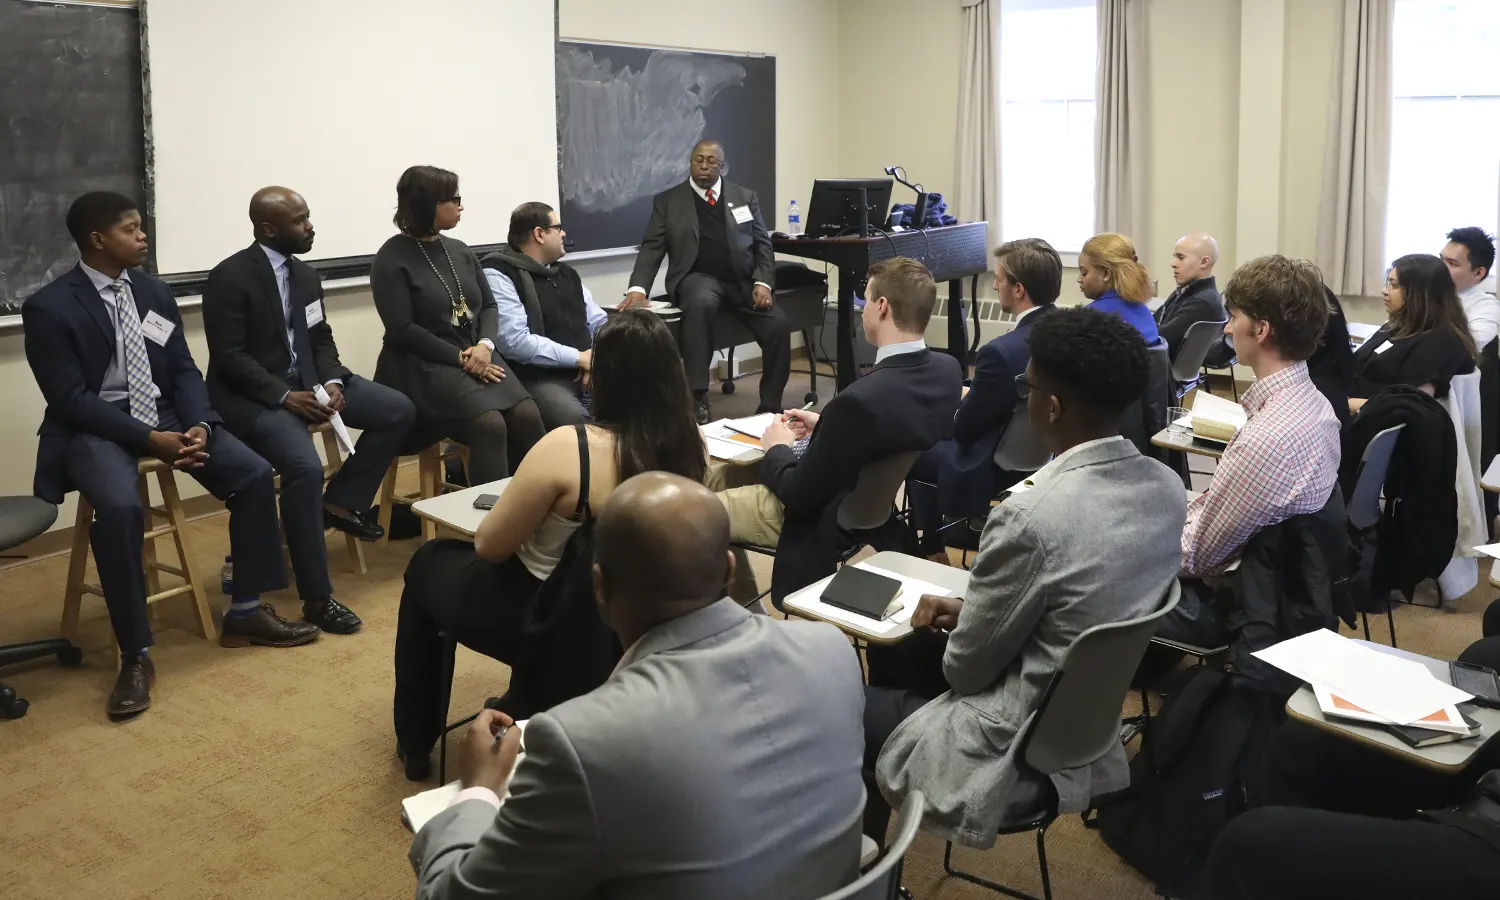 During the Multicultural Networking and Career Conference, Trustee Michael Rawlins ’80, P’16 moderated the Business Panel session.